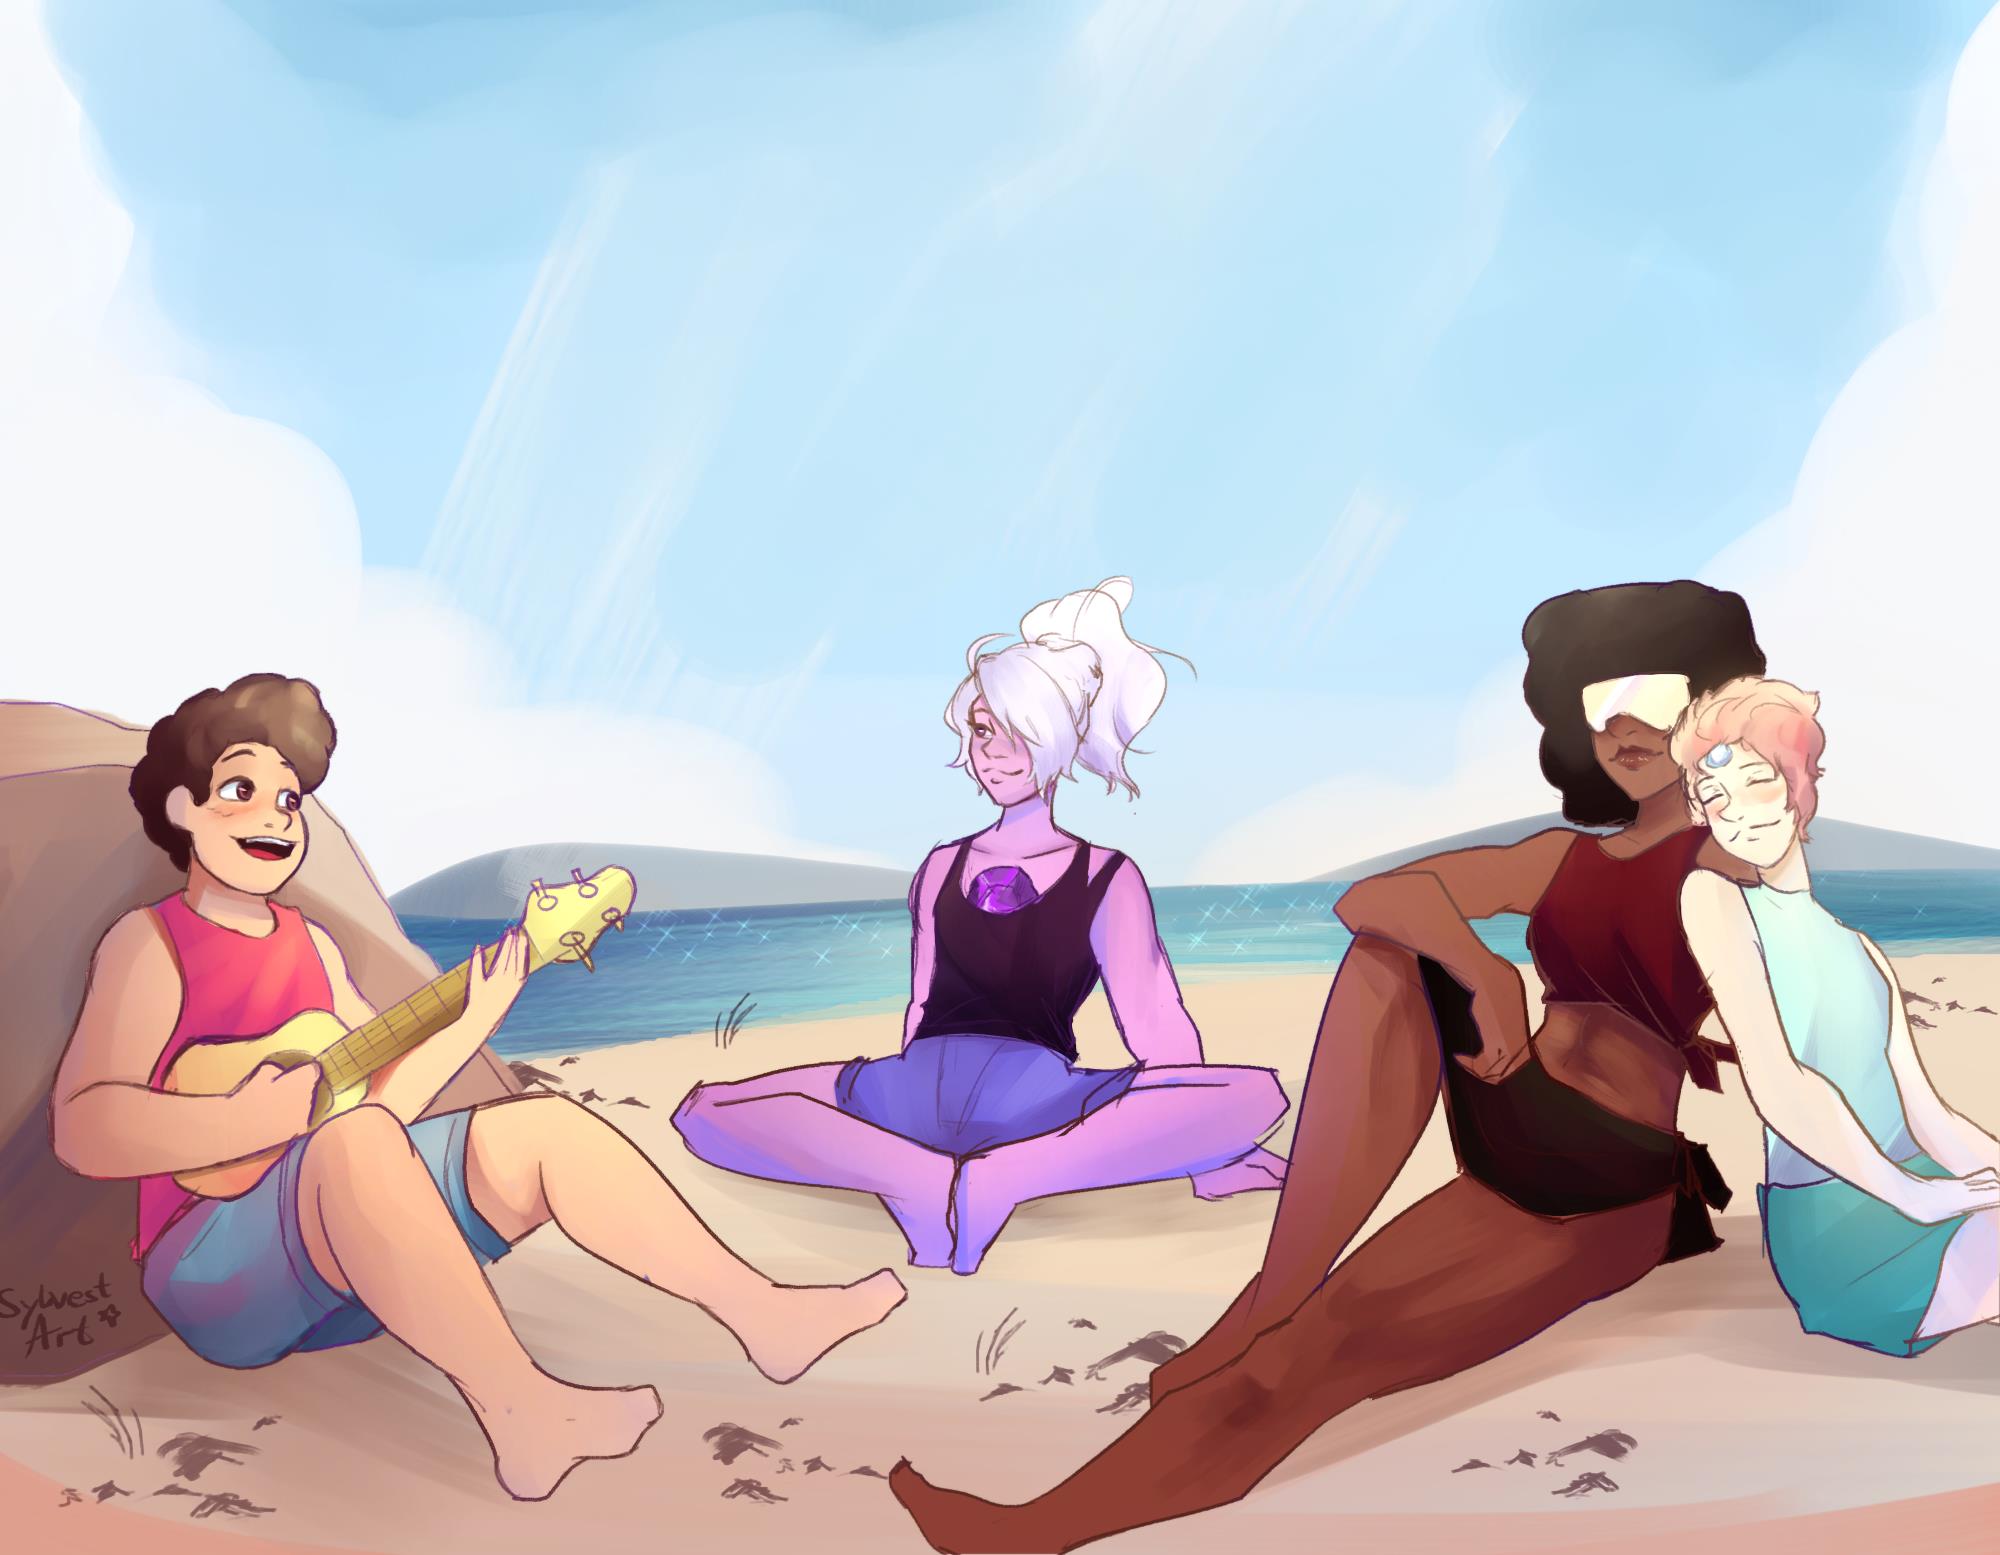 The crystal gems and Steven Universe